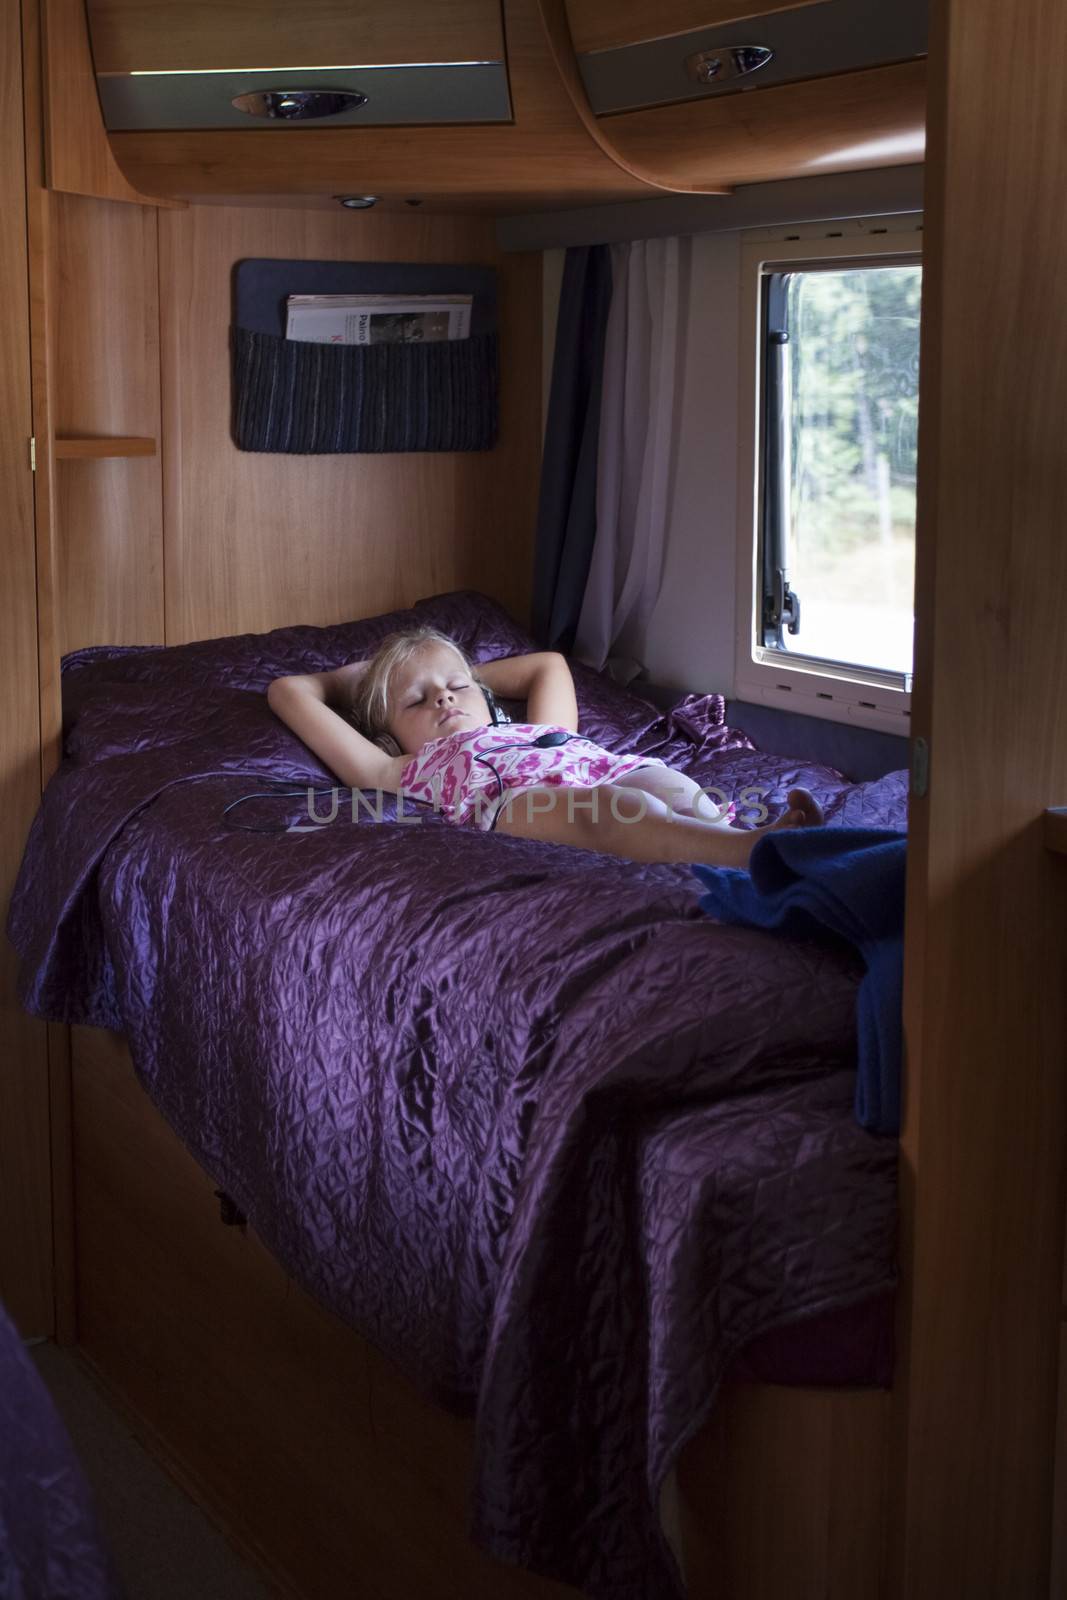 A girl sleeping in a bunk bed inside a moving trailer